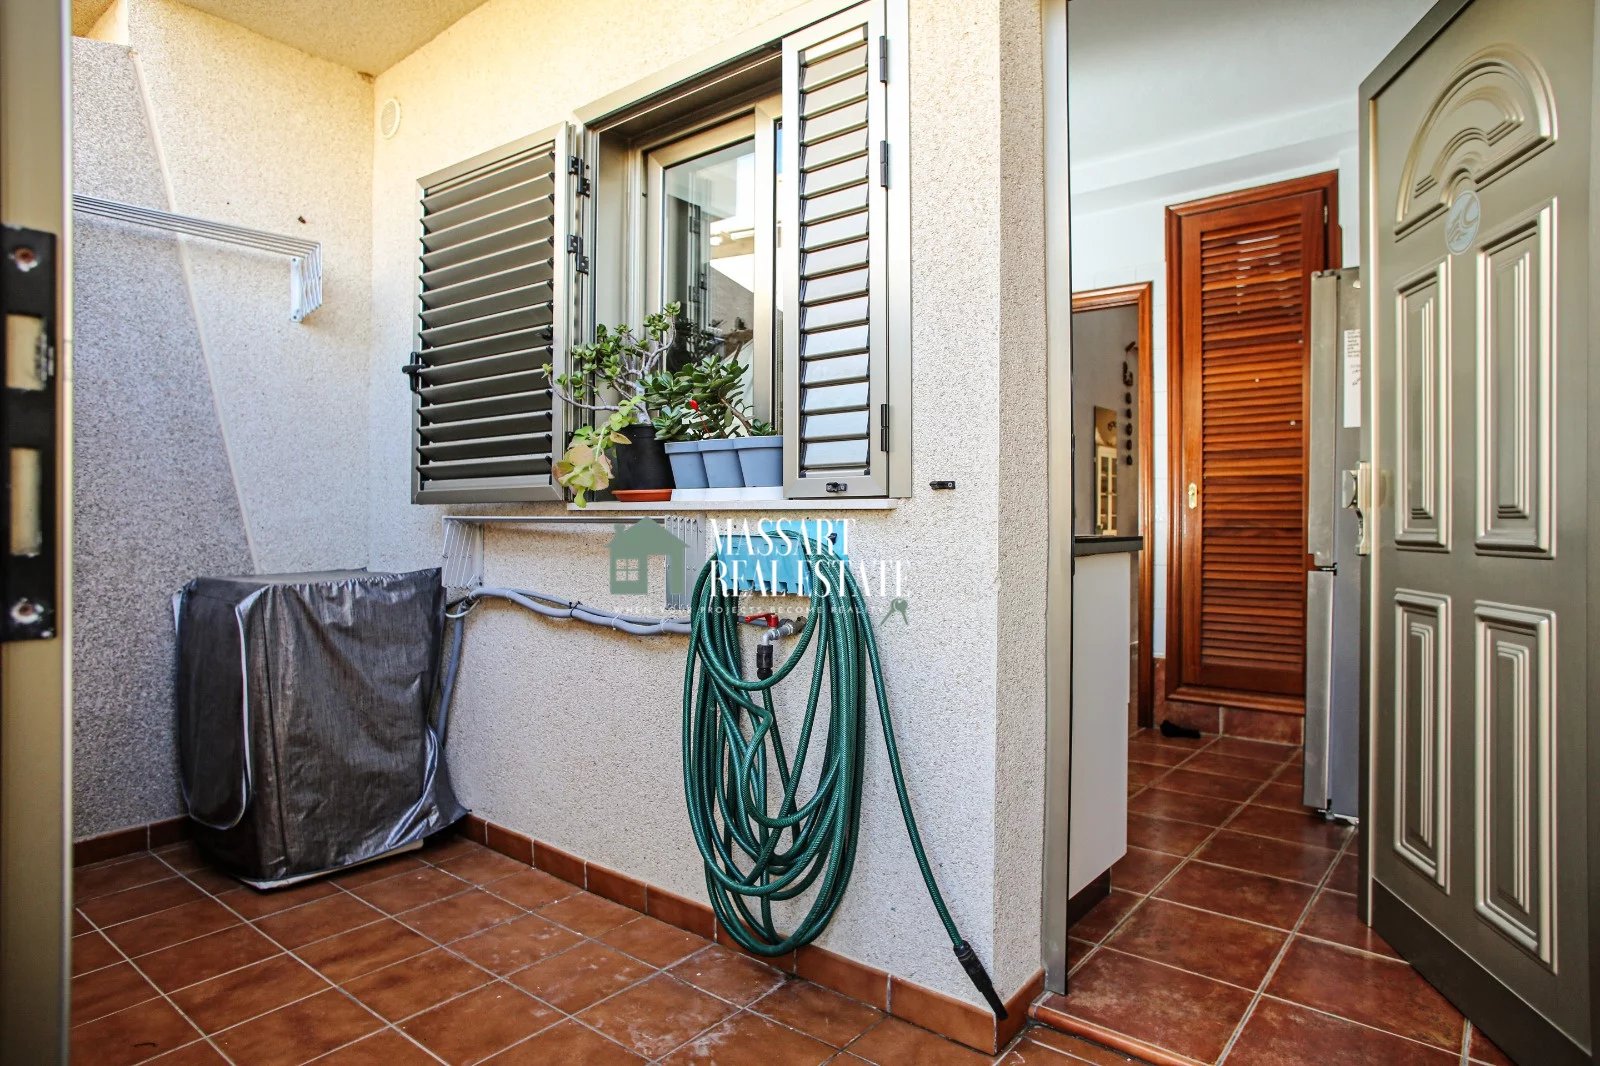 Semi-detached house built with quality materials on the second line of the sea in El Médano.